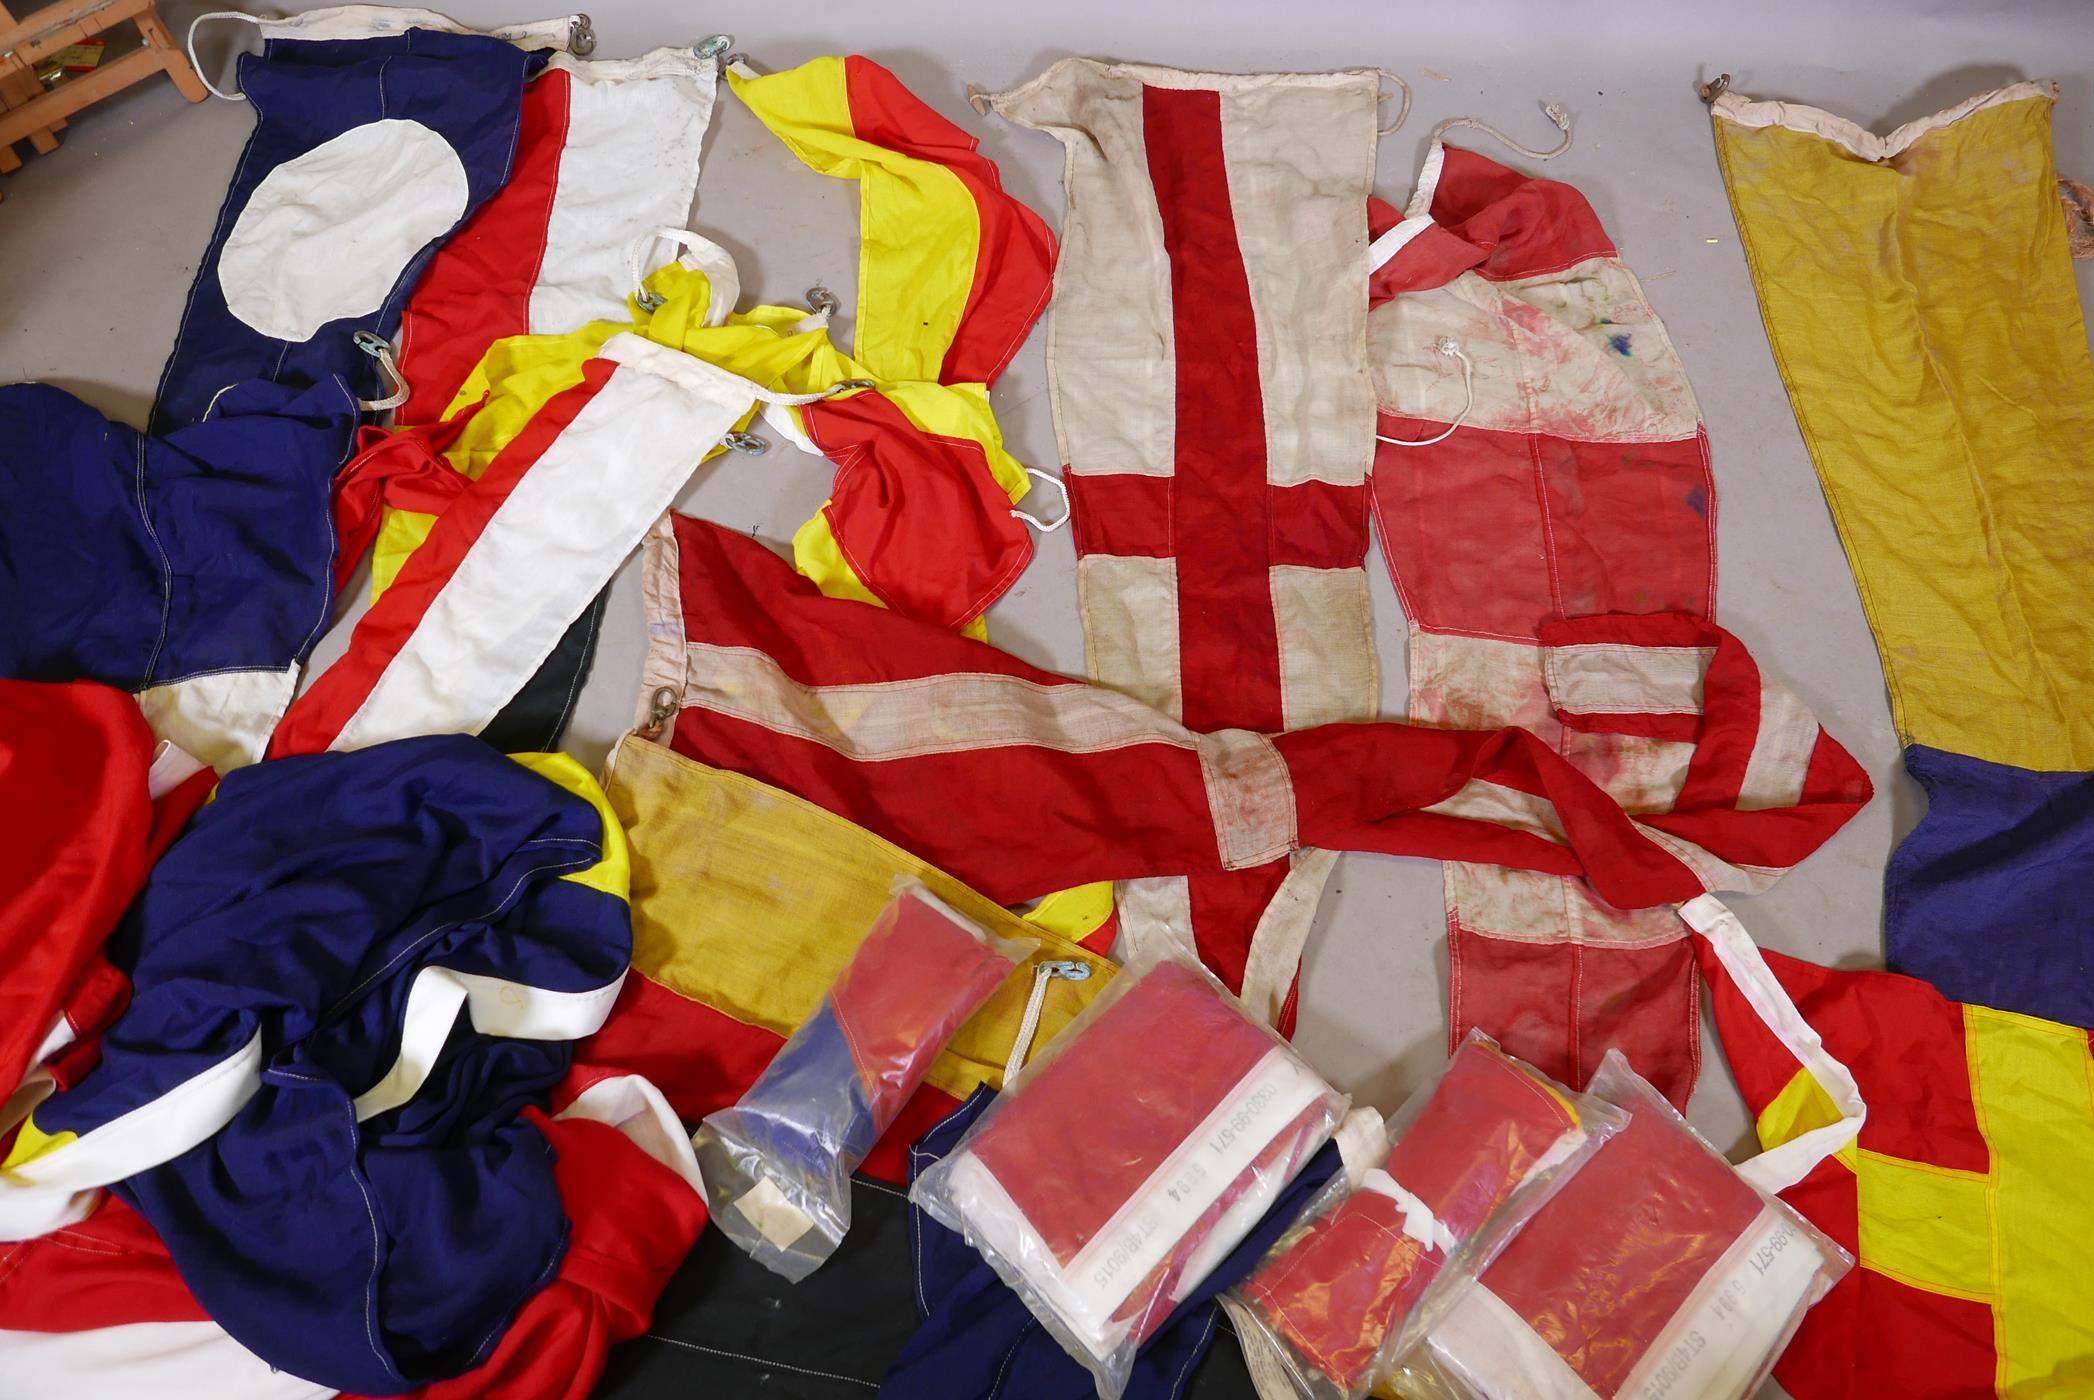 Twenty four Royal Navy Ship's signal flags and pennants, and National flags of Bolivia, Cuba,